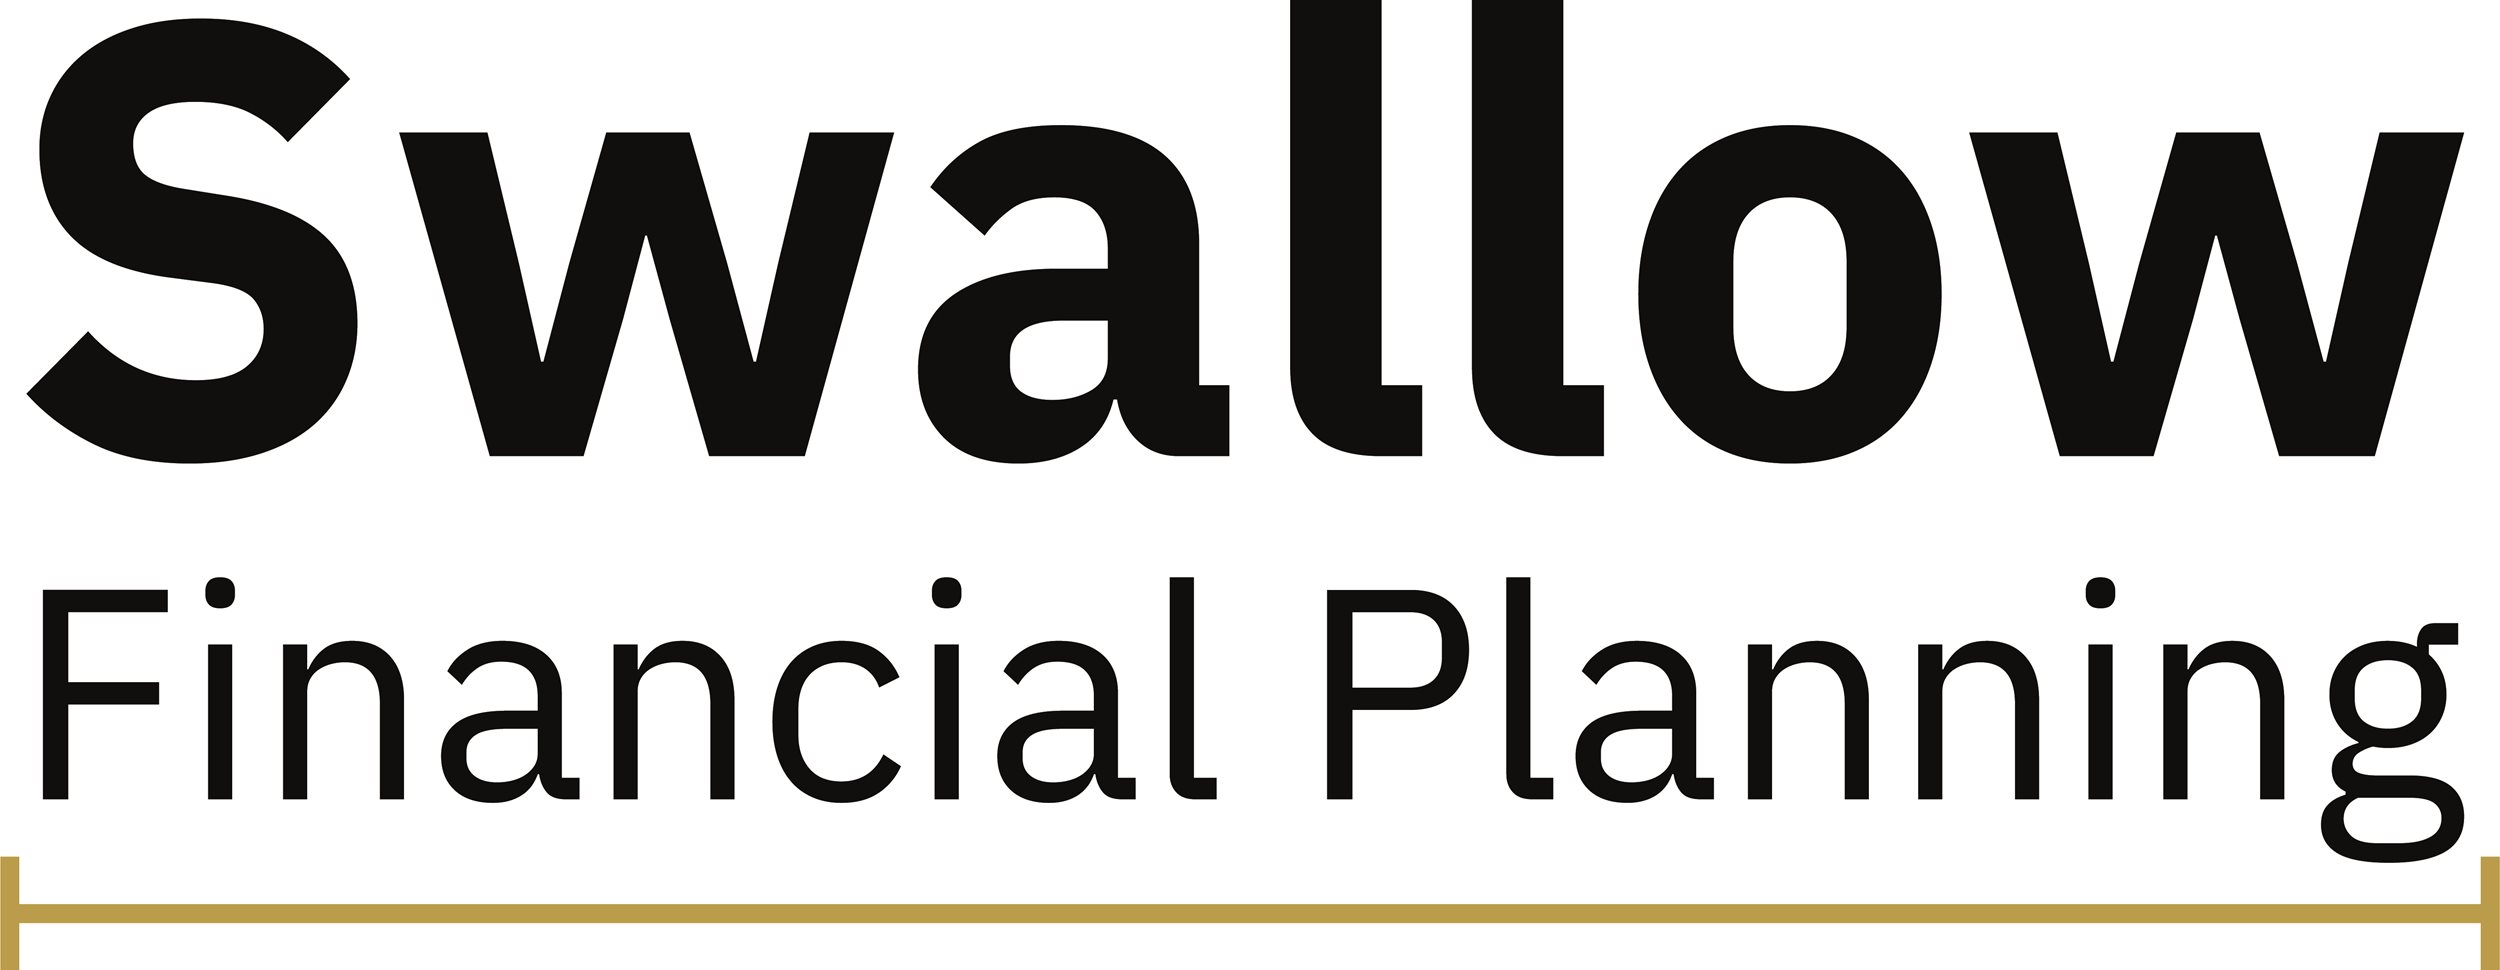 Swallow Financial Planning